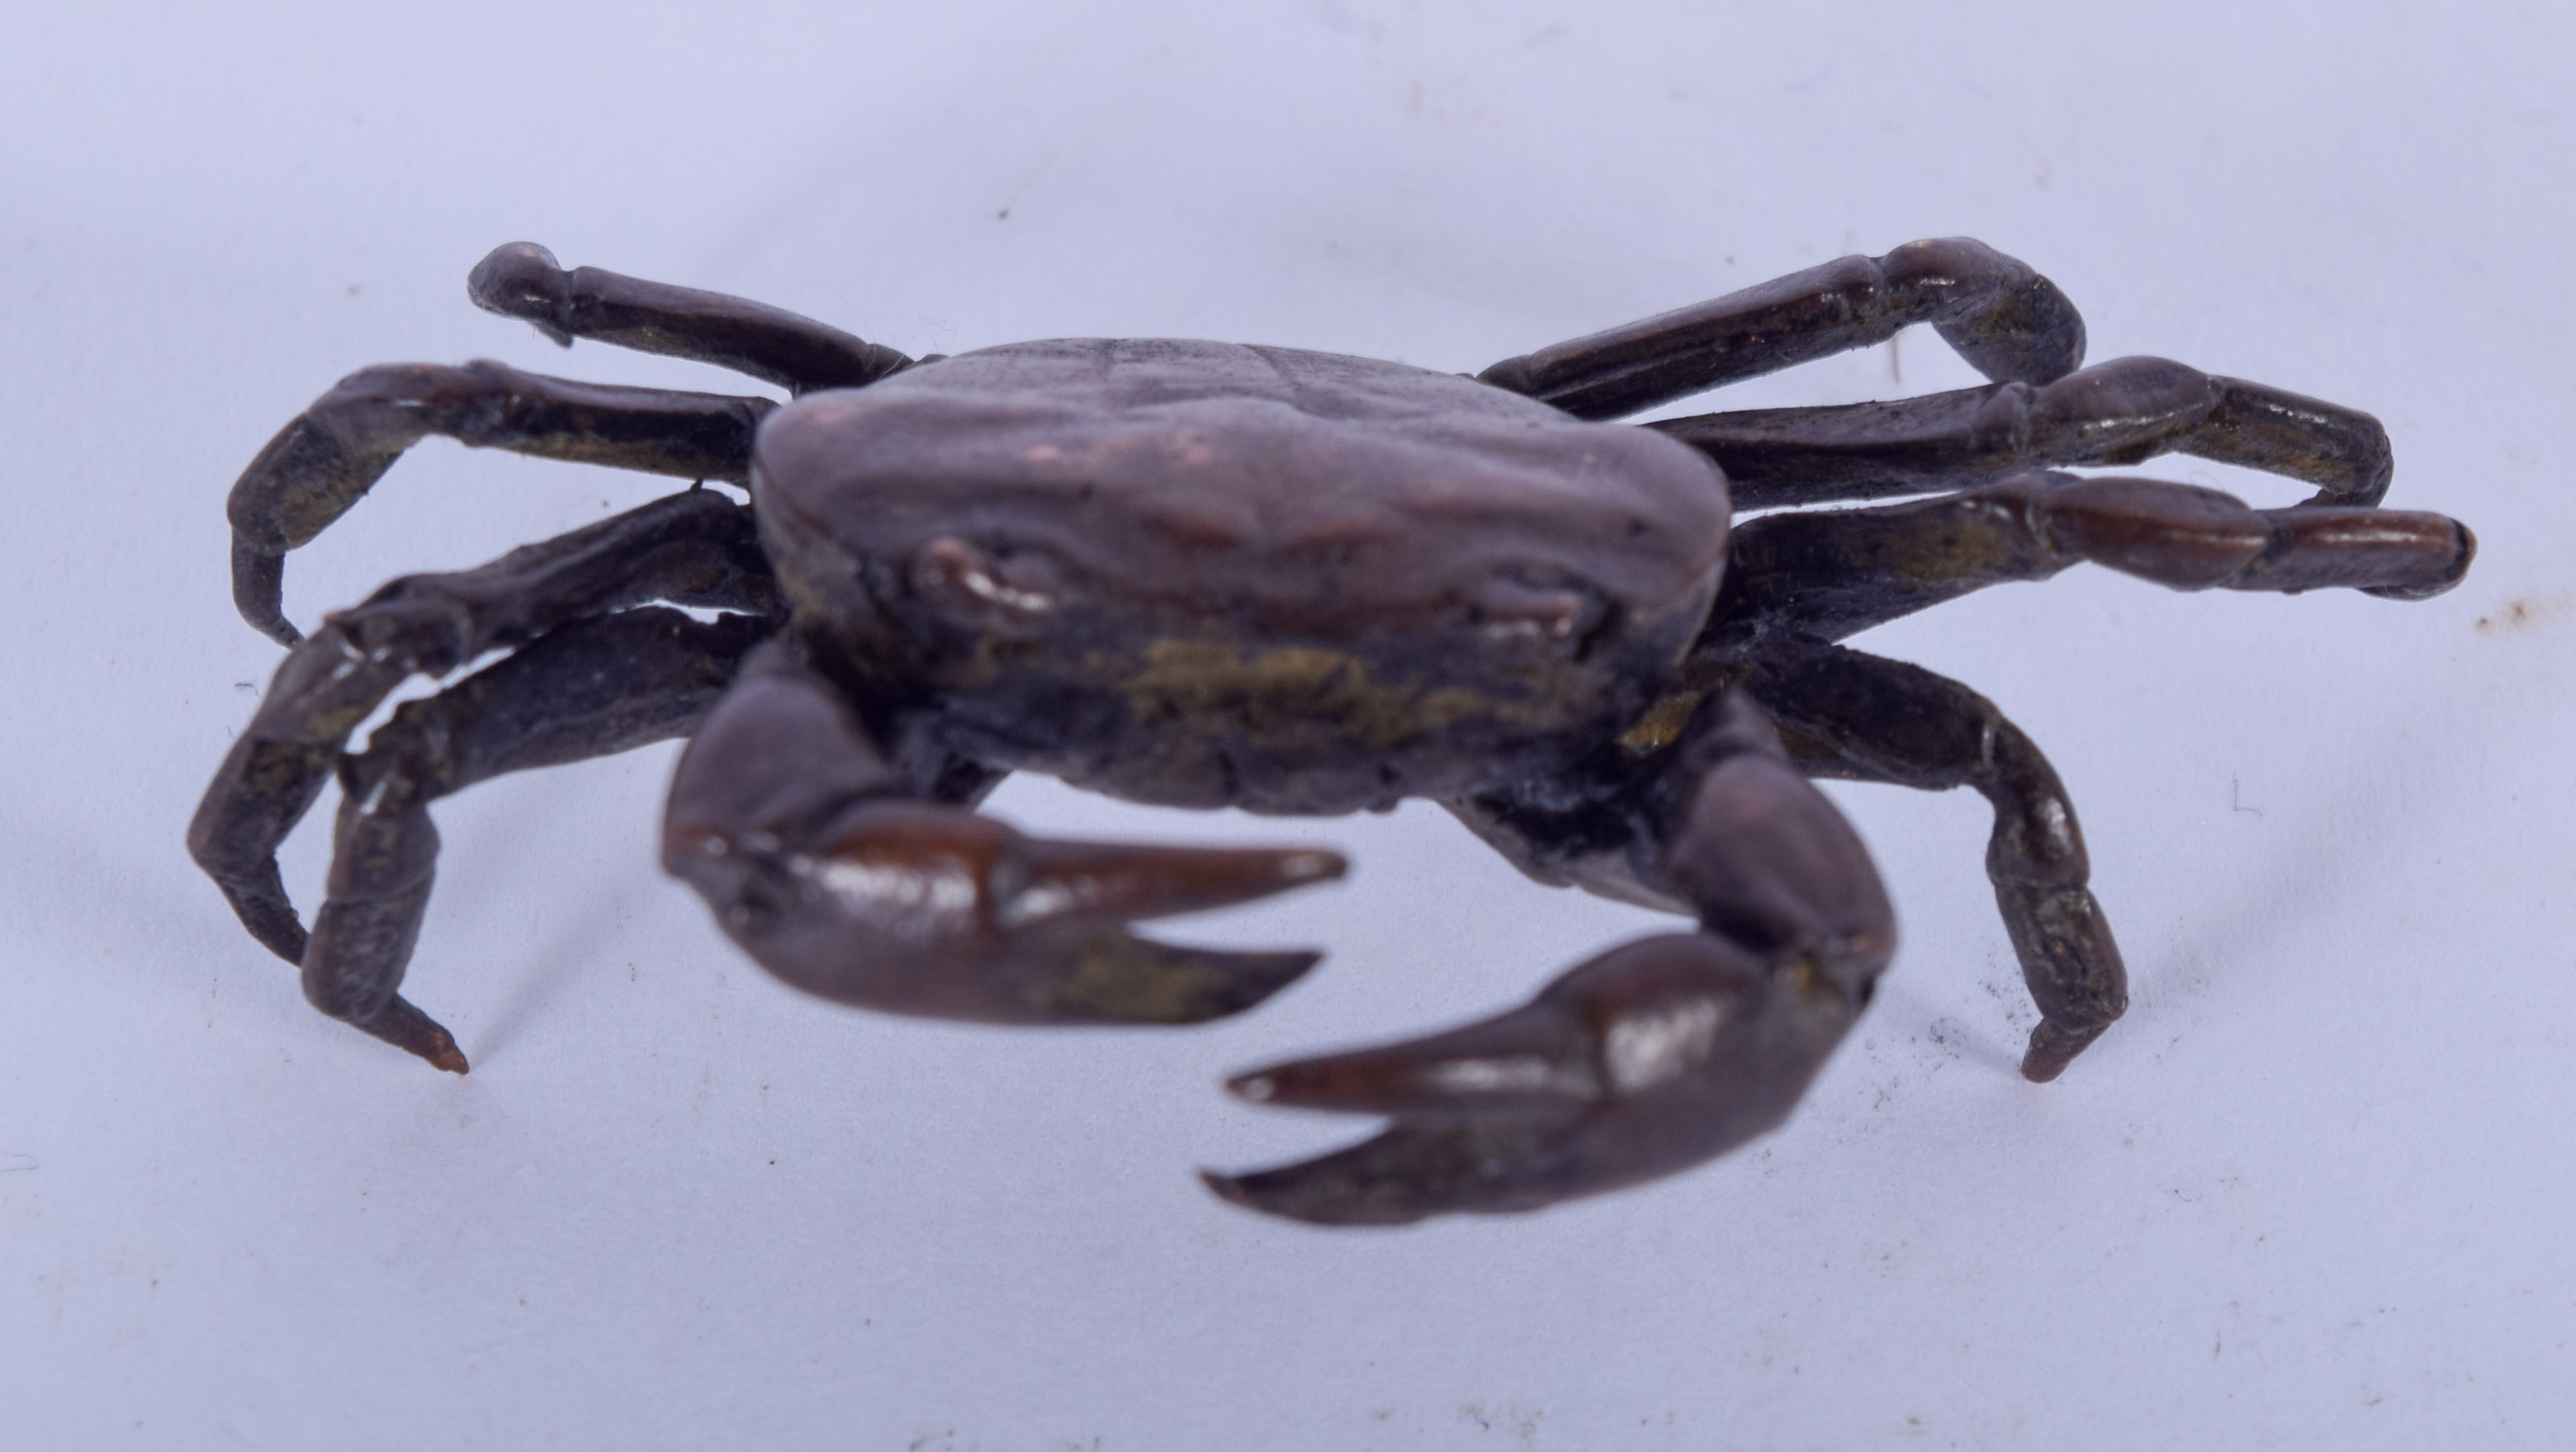 A JAPANESE BRONZE OKIMONO IN THE FORM OF A CRAB. 5.25 cm wide.